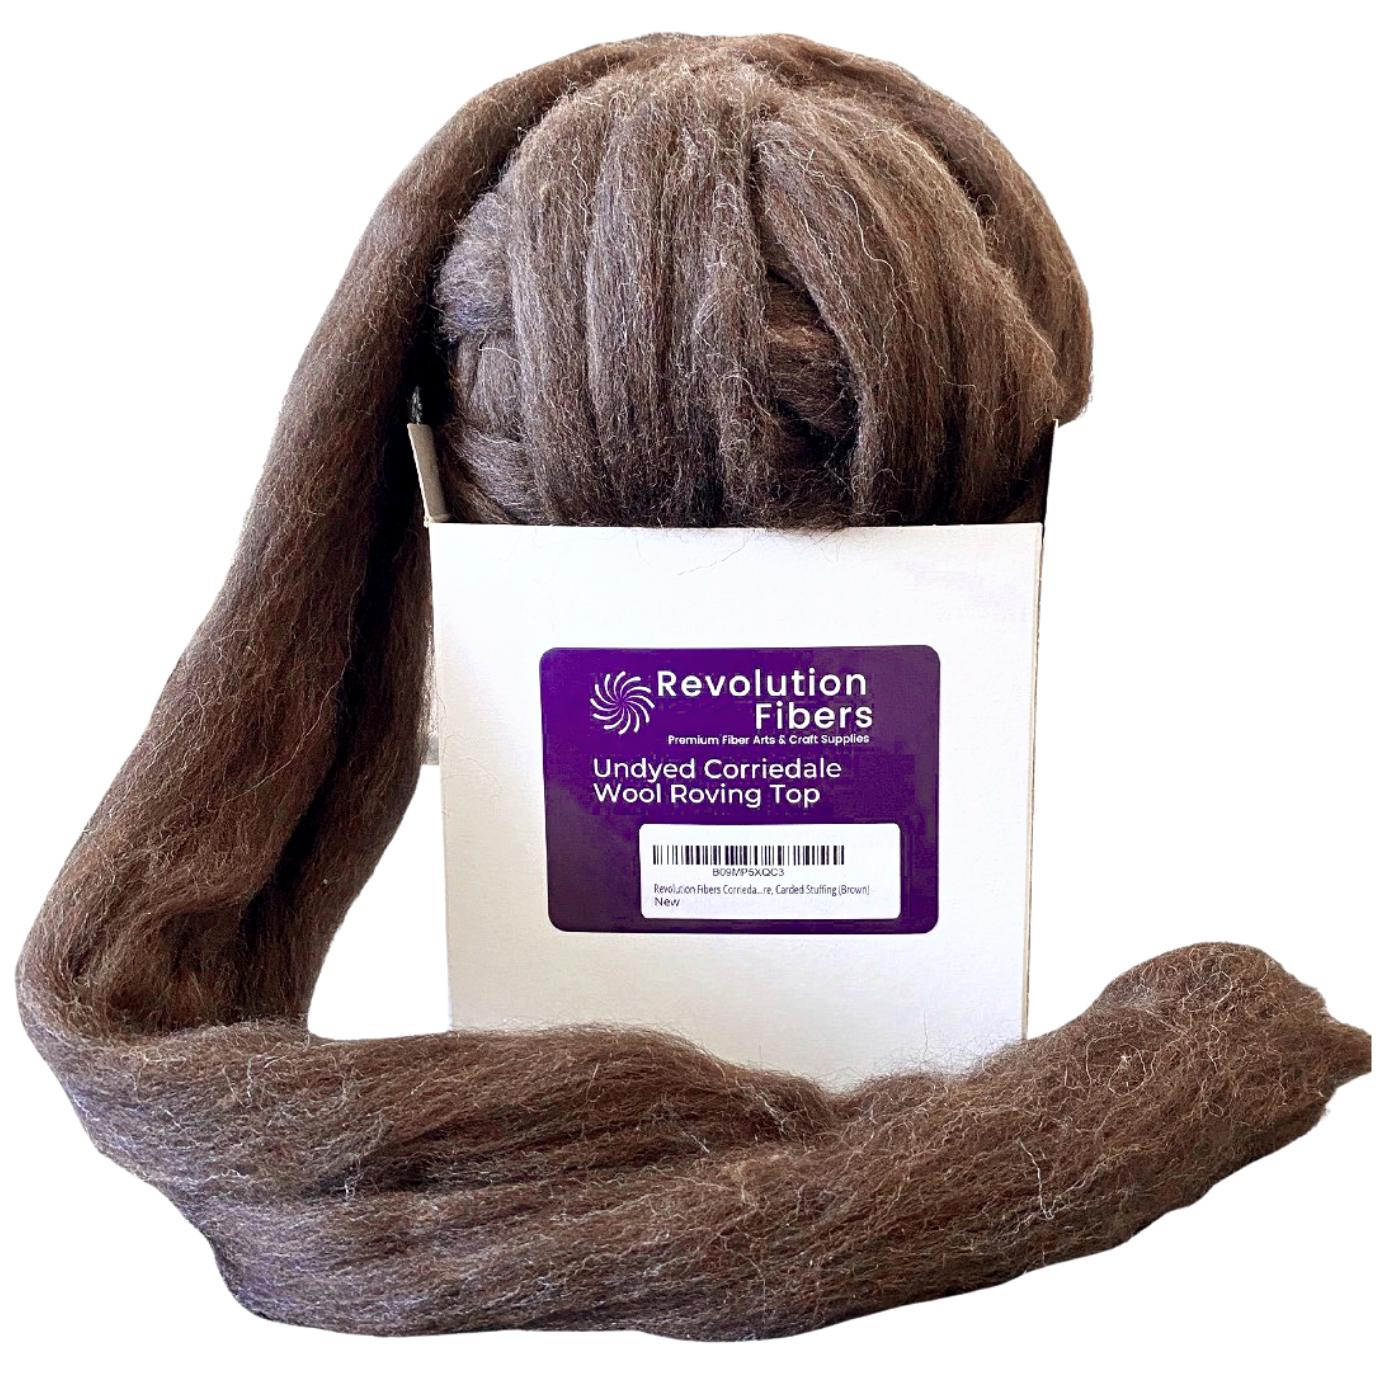 Corriedale Wool Roving Top (1 lb / 16 oz) | 28 Microns, Natural Brown Undyed, Cleaned and Combed Core Wool - Textile Indie 